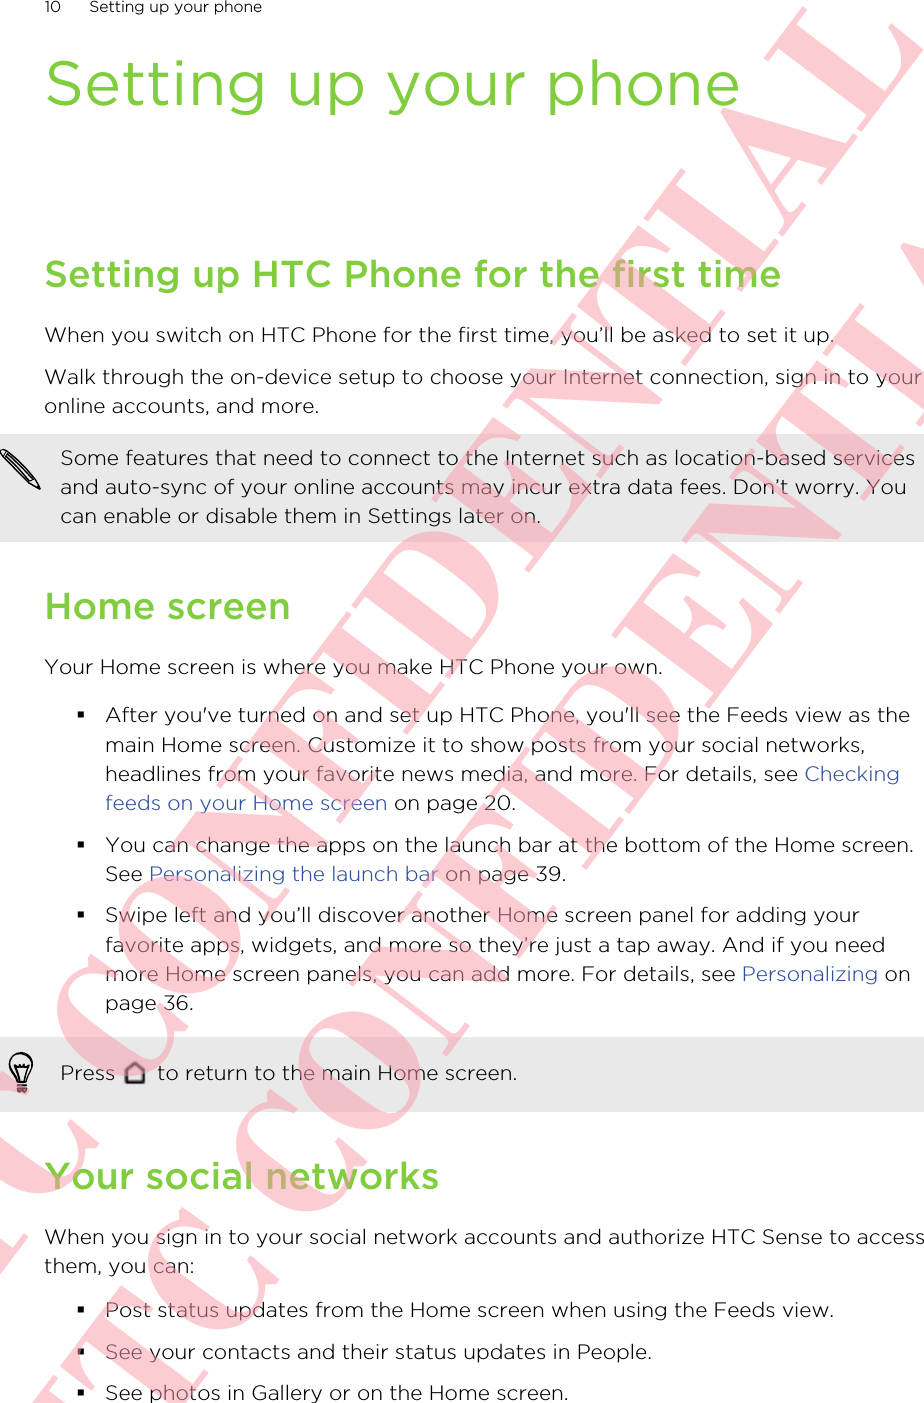 Setting up your phoneSetting up HTC Phone for the first timeWhen you switch on HTC Phone for the first time, you’ll be asked to set it up.Walk through the on-device setup to choose your Internet connection, sign in to youronline accounts, and more.Some features that need to connect to the Internet such as location-based servicesand auto-sync of your online accounts may incur extra data fees. Don’t worry. Youcan enable or disable them in Settings later on.Home screenYour Home screen is where you make HTC Phone your own.§After you&apos;ve turned on and set up HTC Phone, you&apos;ll see the Feeds view as themain Home screen. Customize it to show posts from your social networks,headlines from your favorite news media, and more. For details, see Checkingfeeds on your Home screen on page 20.§You can change the apps on the launch bar at the bottom of the Home screen.See Personalizing the launch bar on page 39.§Swipe left and you’ll discover another Home screen panel for adding yourfavorite apps, widgets, and more so they’re just a tap away. And if you needmore Home screen panels, you can add more. For details, see Personalizing onpage 36.Press   to return to the main Home screen.Your social networksWhen you sign in to your social network accounts and authorize HTC Sense to accessthem, you can:§Post status updates from the Home screen when using the Feeds view.§See your contacts and their status updates in People.§See photos in Gallery or on the Home screen.10 Setting up your phoneHTC CONFIDENTIAL HTC CONFIDENTIAL